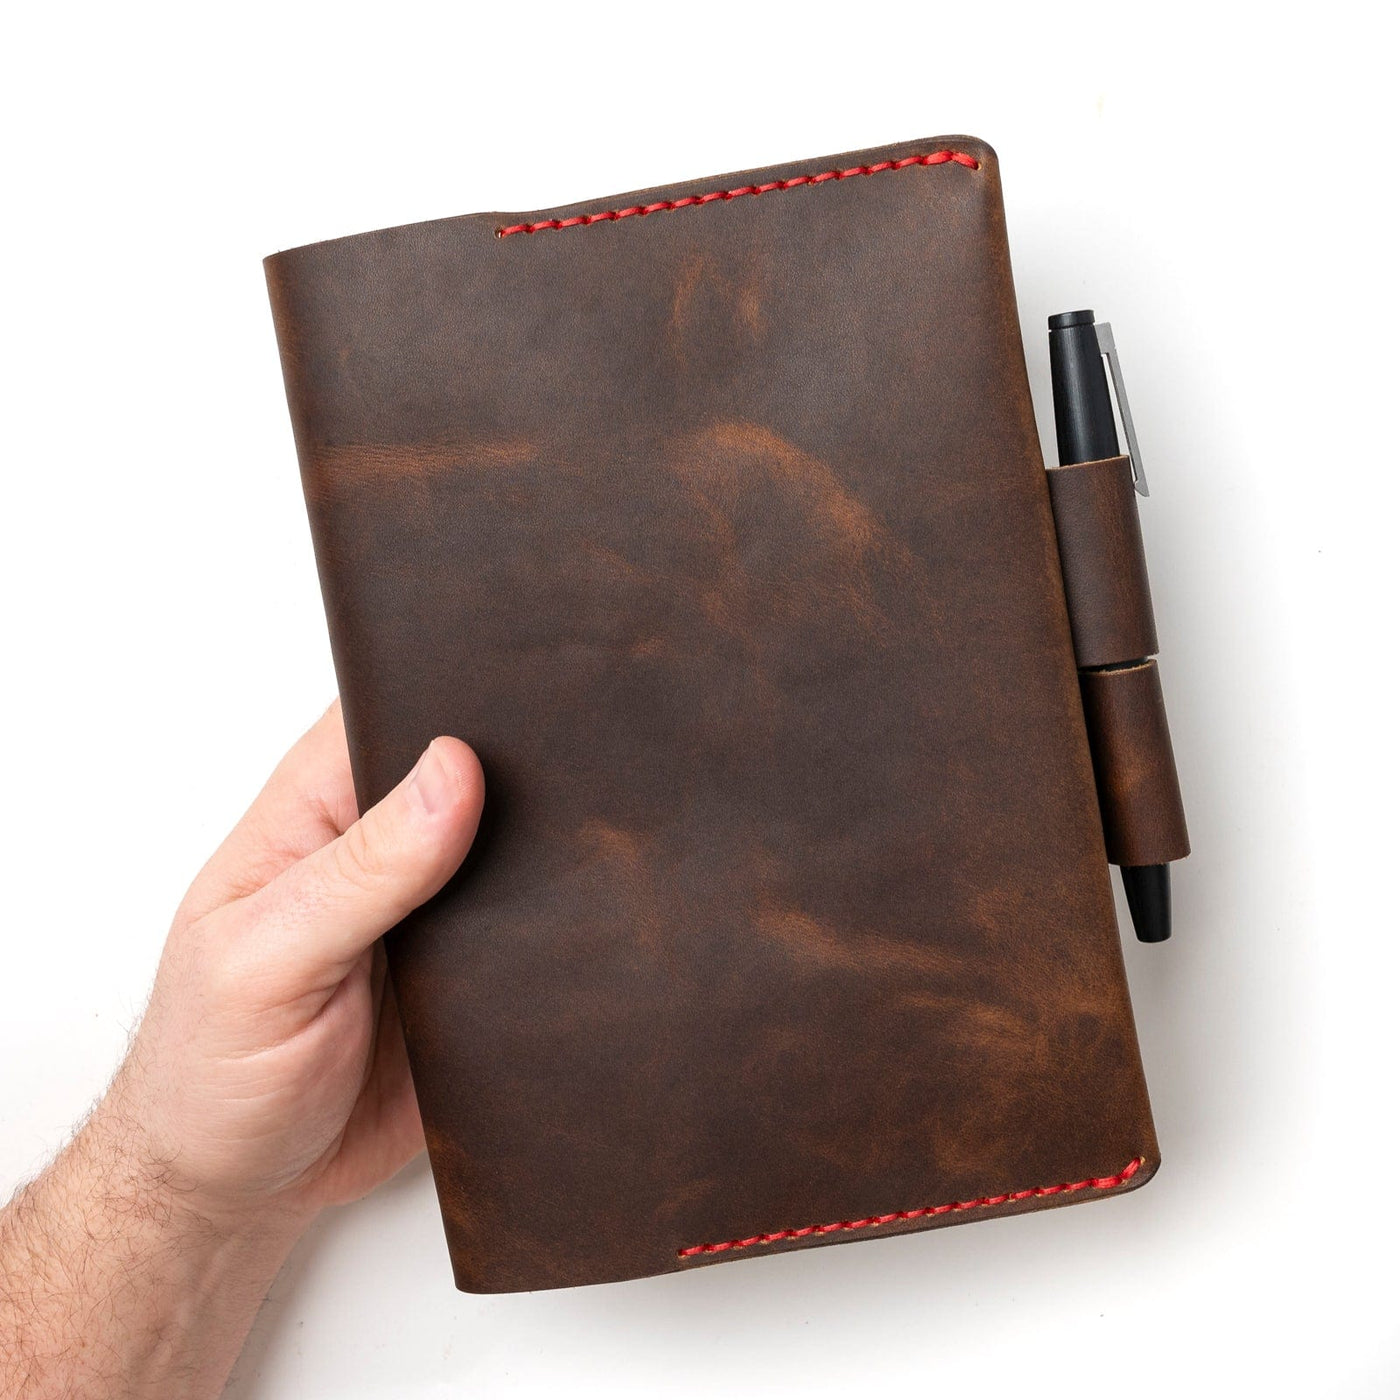 Leather A5 Notebook Cover - Heritage Brown Popov Leather